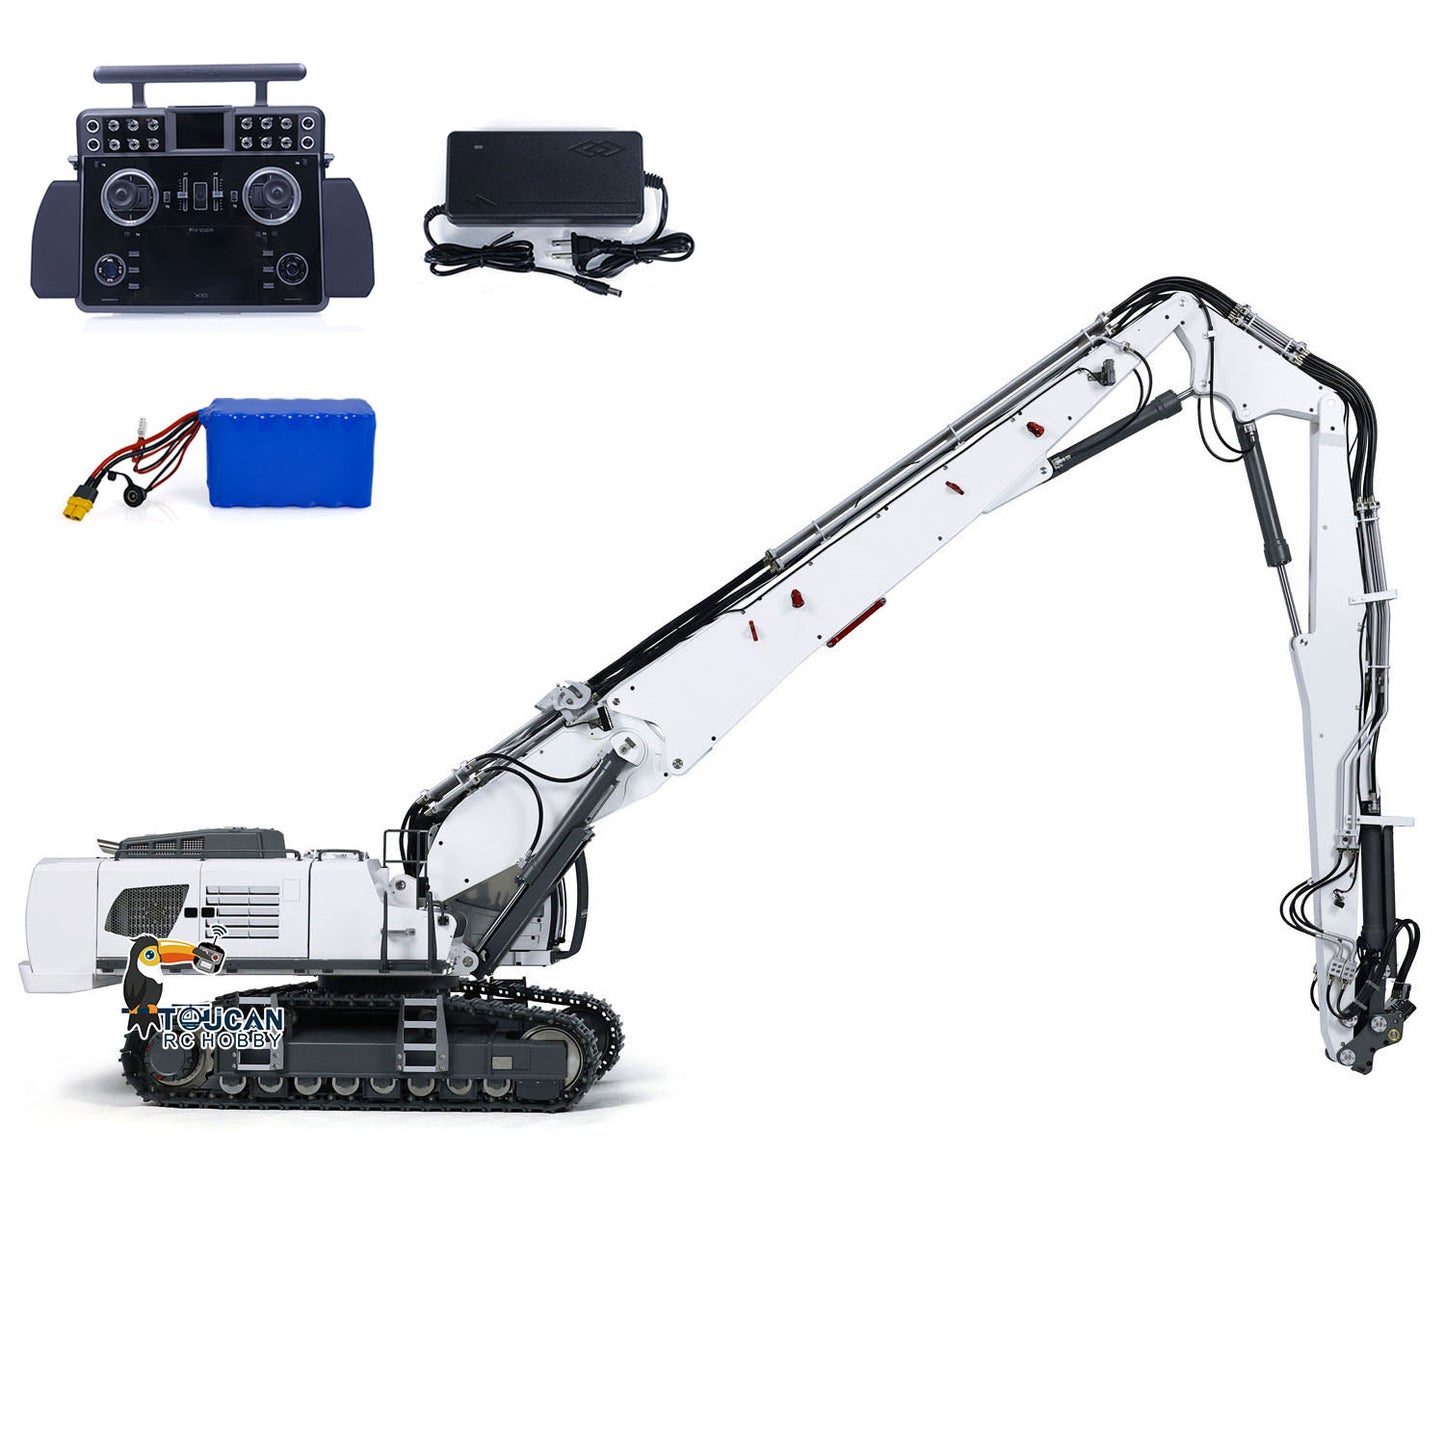 LOWEST PRICE 1/14 K970-300S Hydraulic RC Excavator Remote Control Digger Hobby Model Demolition Machine RTR TandemXE Sound Light System